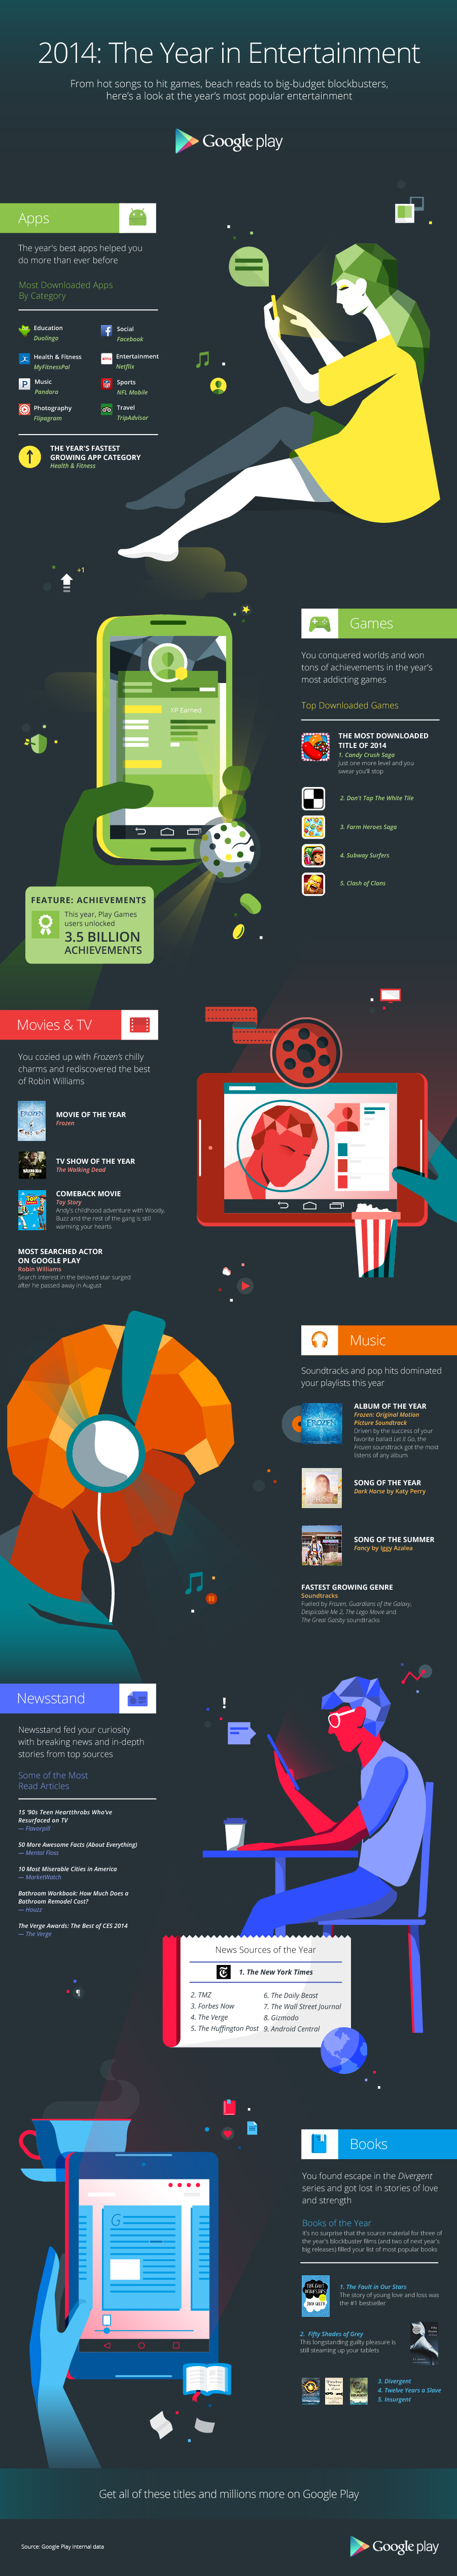 Google Play - End of Year Infographic - 2014 - FINAL (1)